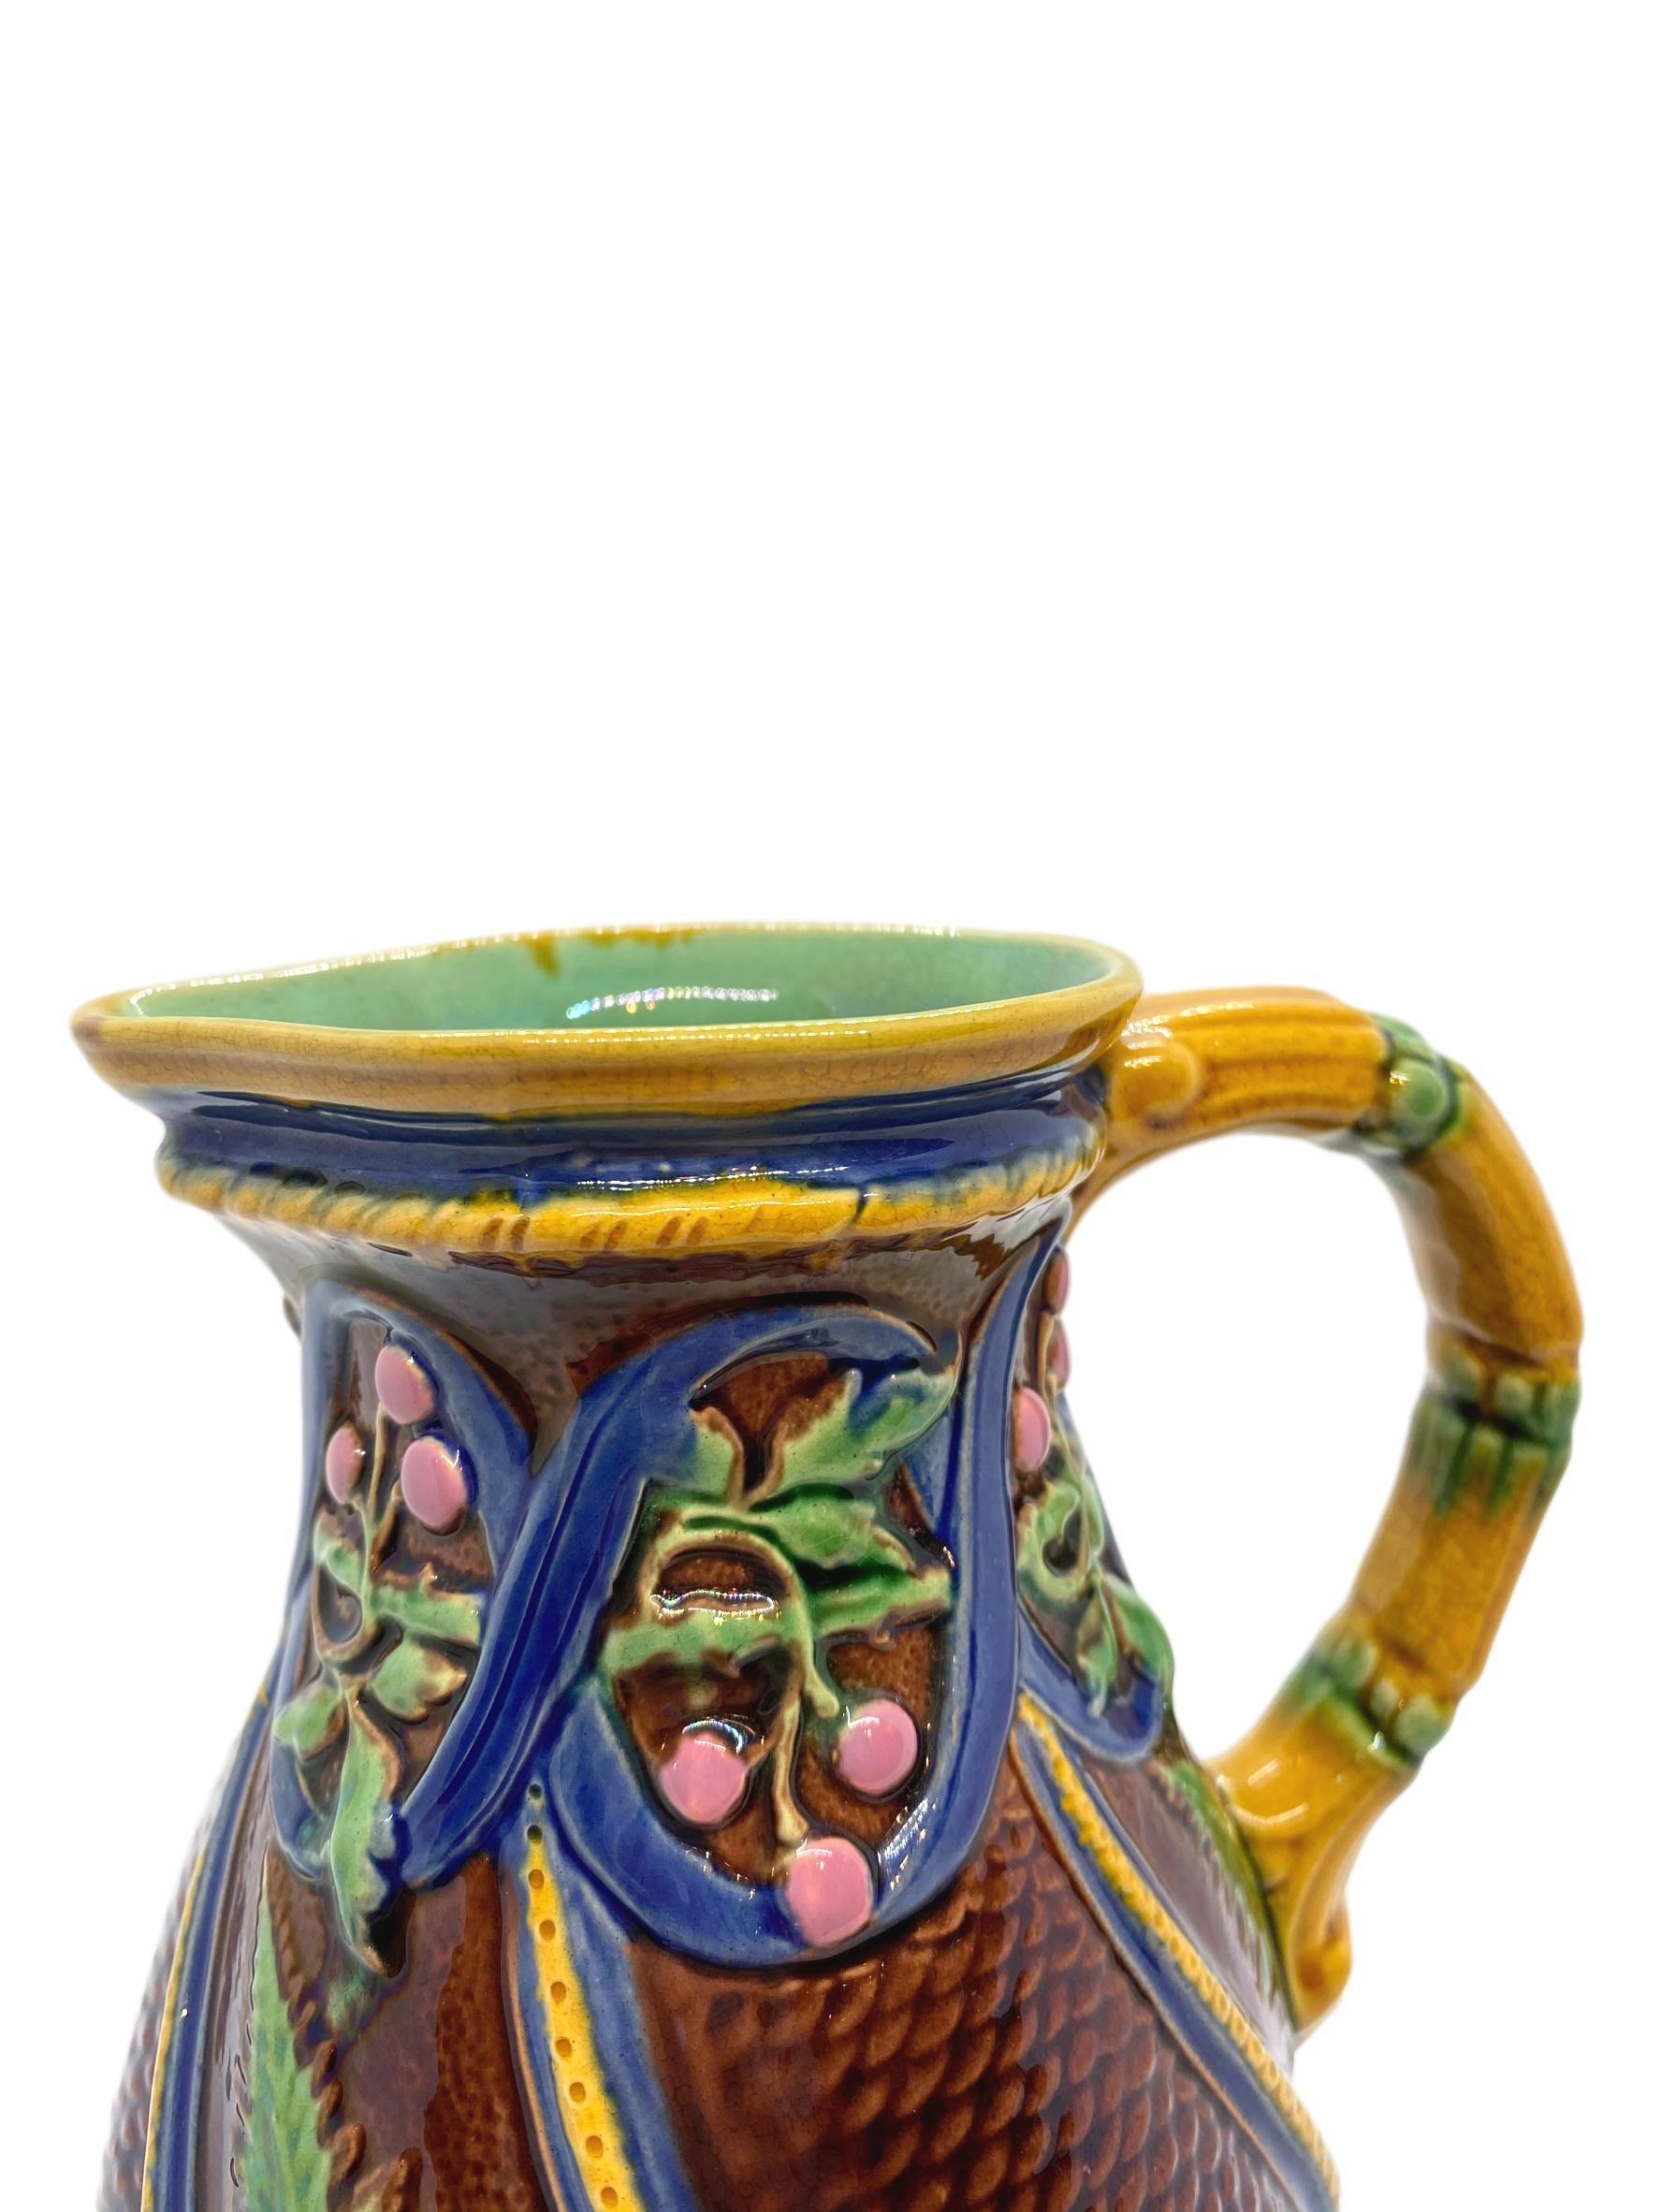 Minton Majolica Pitcher with Ferns and Pink Berries, English, Dated 1860 1